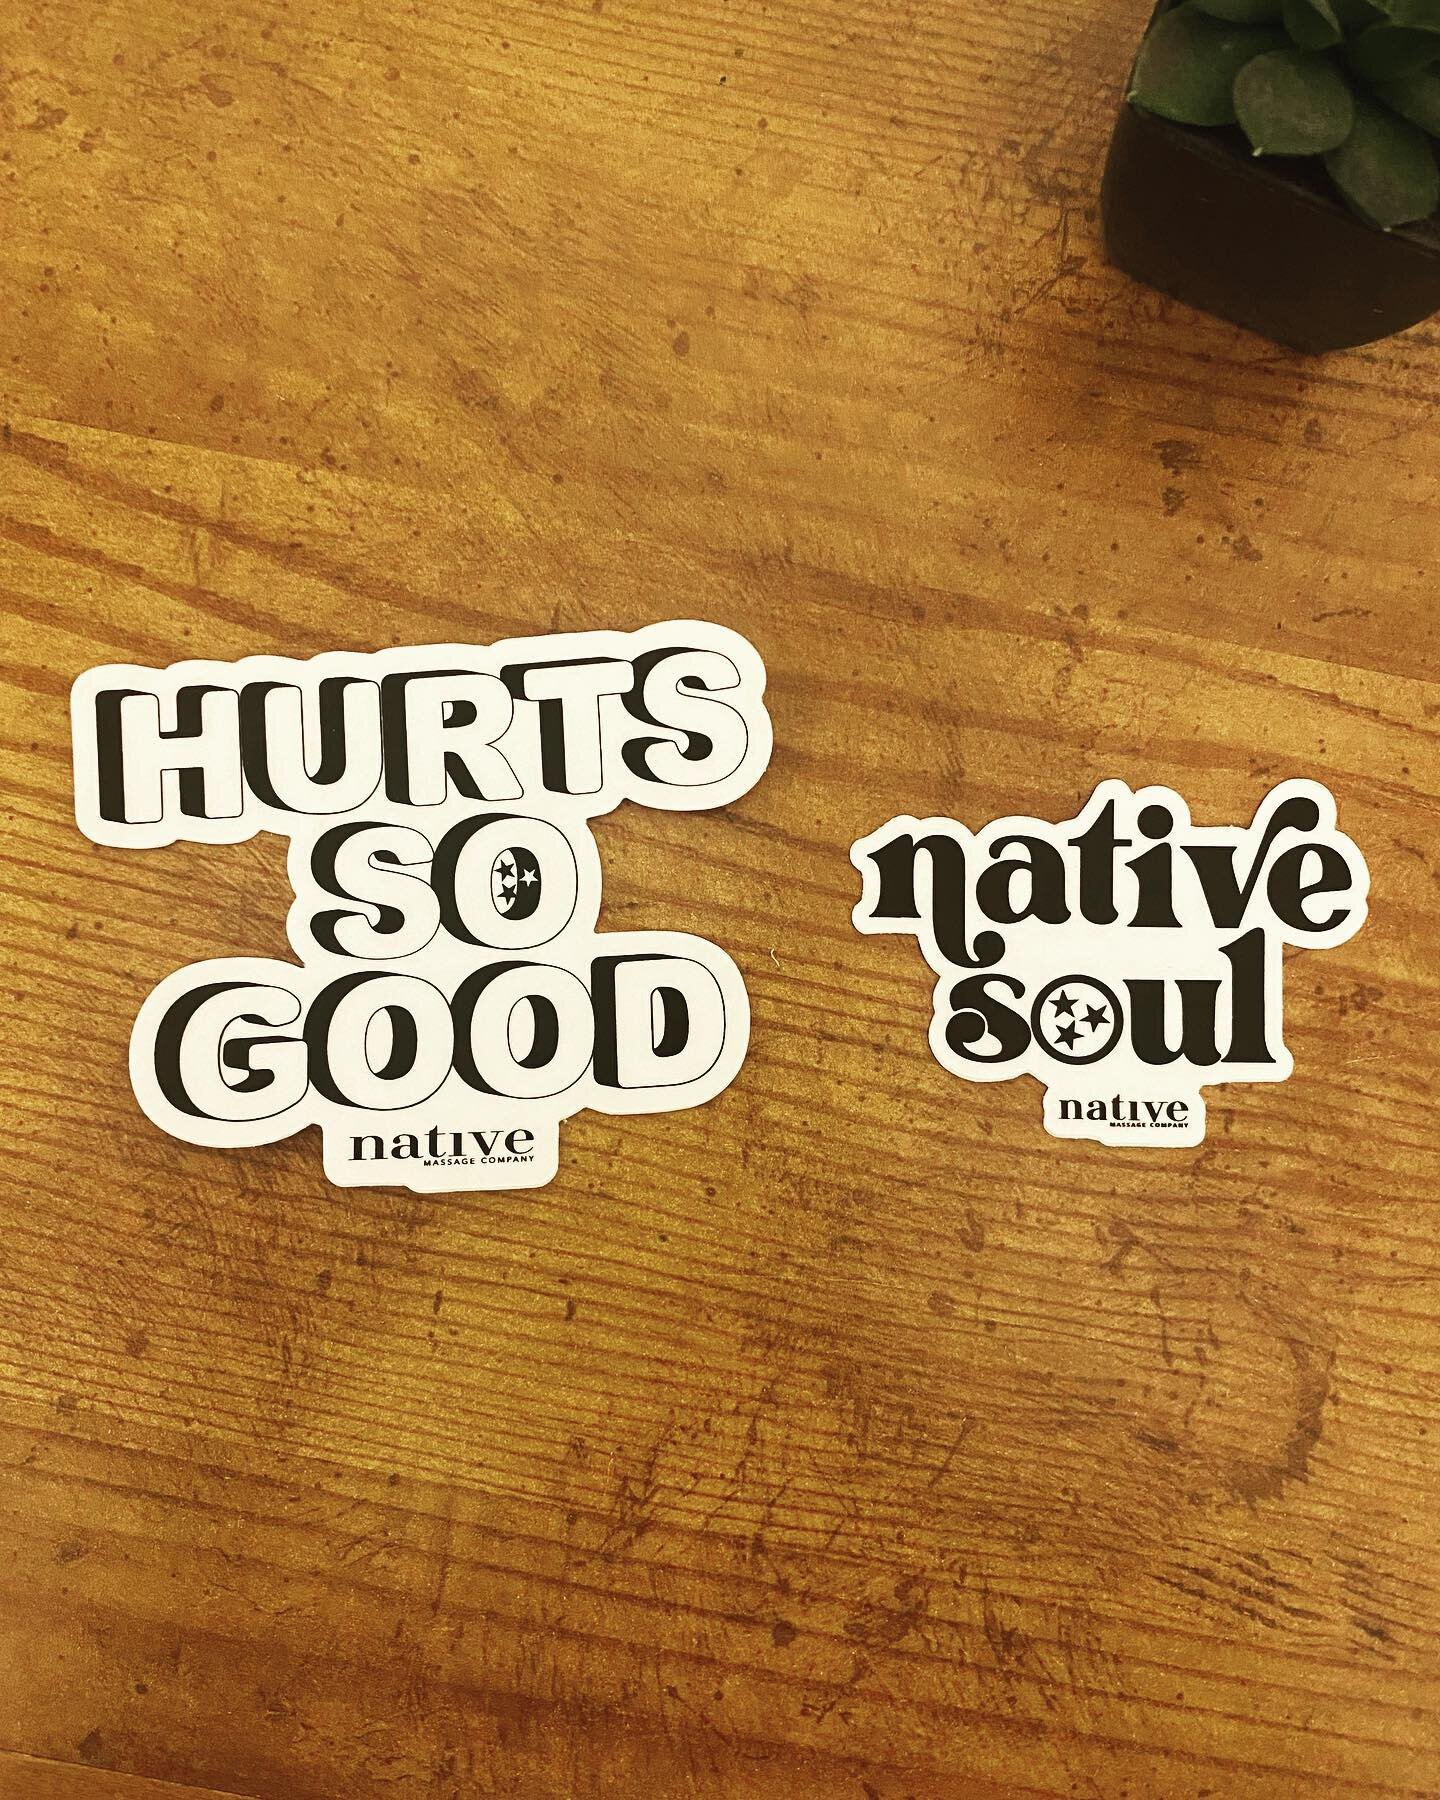 Due to popular demand, the stickers are available for purchase.  These little babies are vinyl and waterproof.  Stick them on your water bottle, your car, wherever you want. 
If you want to purchase you can DM me here or text.  Free shipping! $2 each